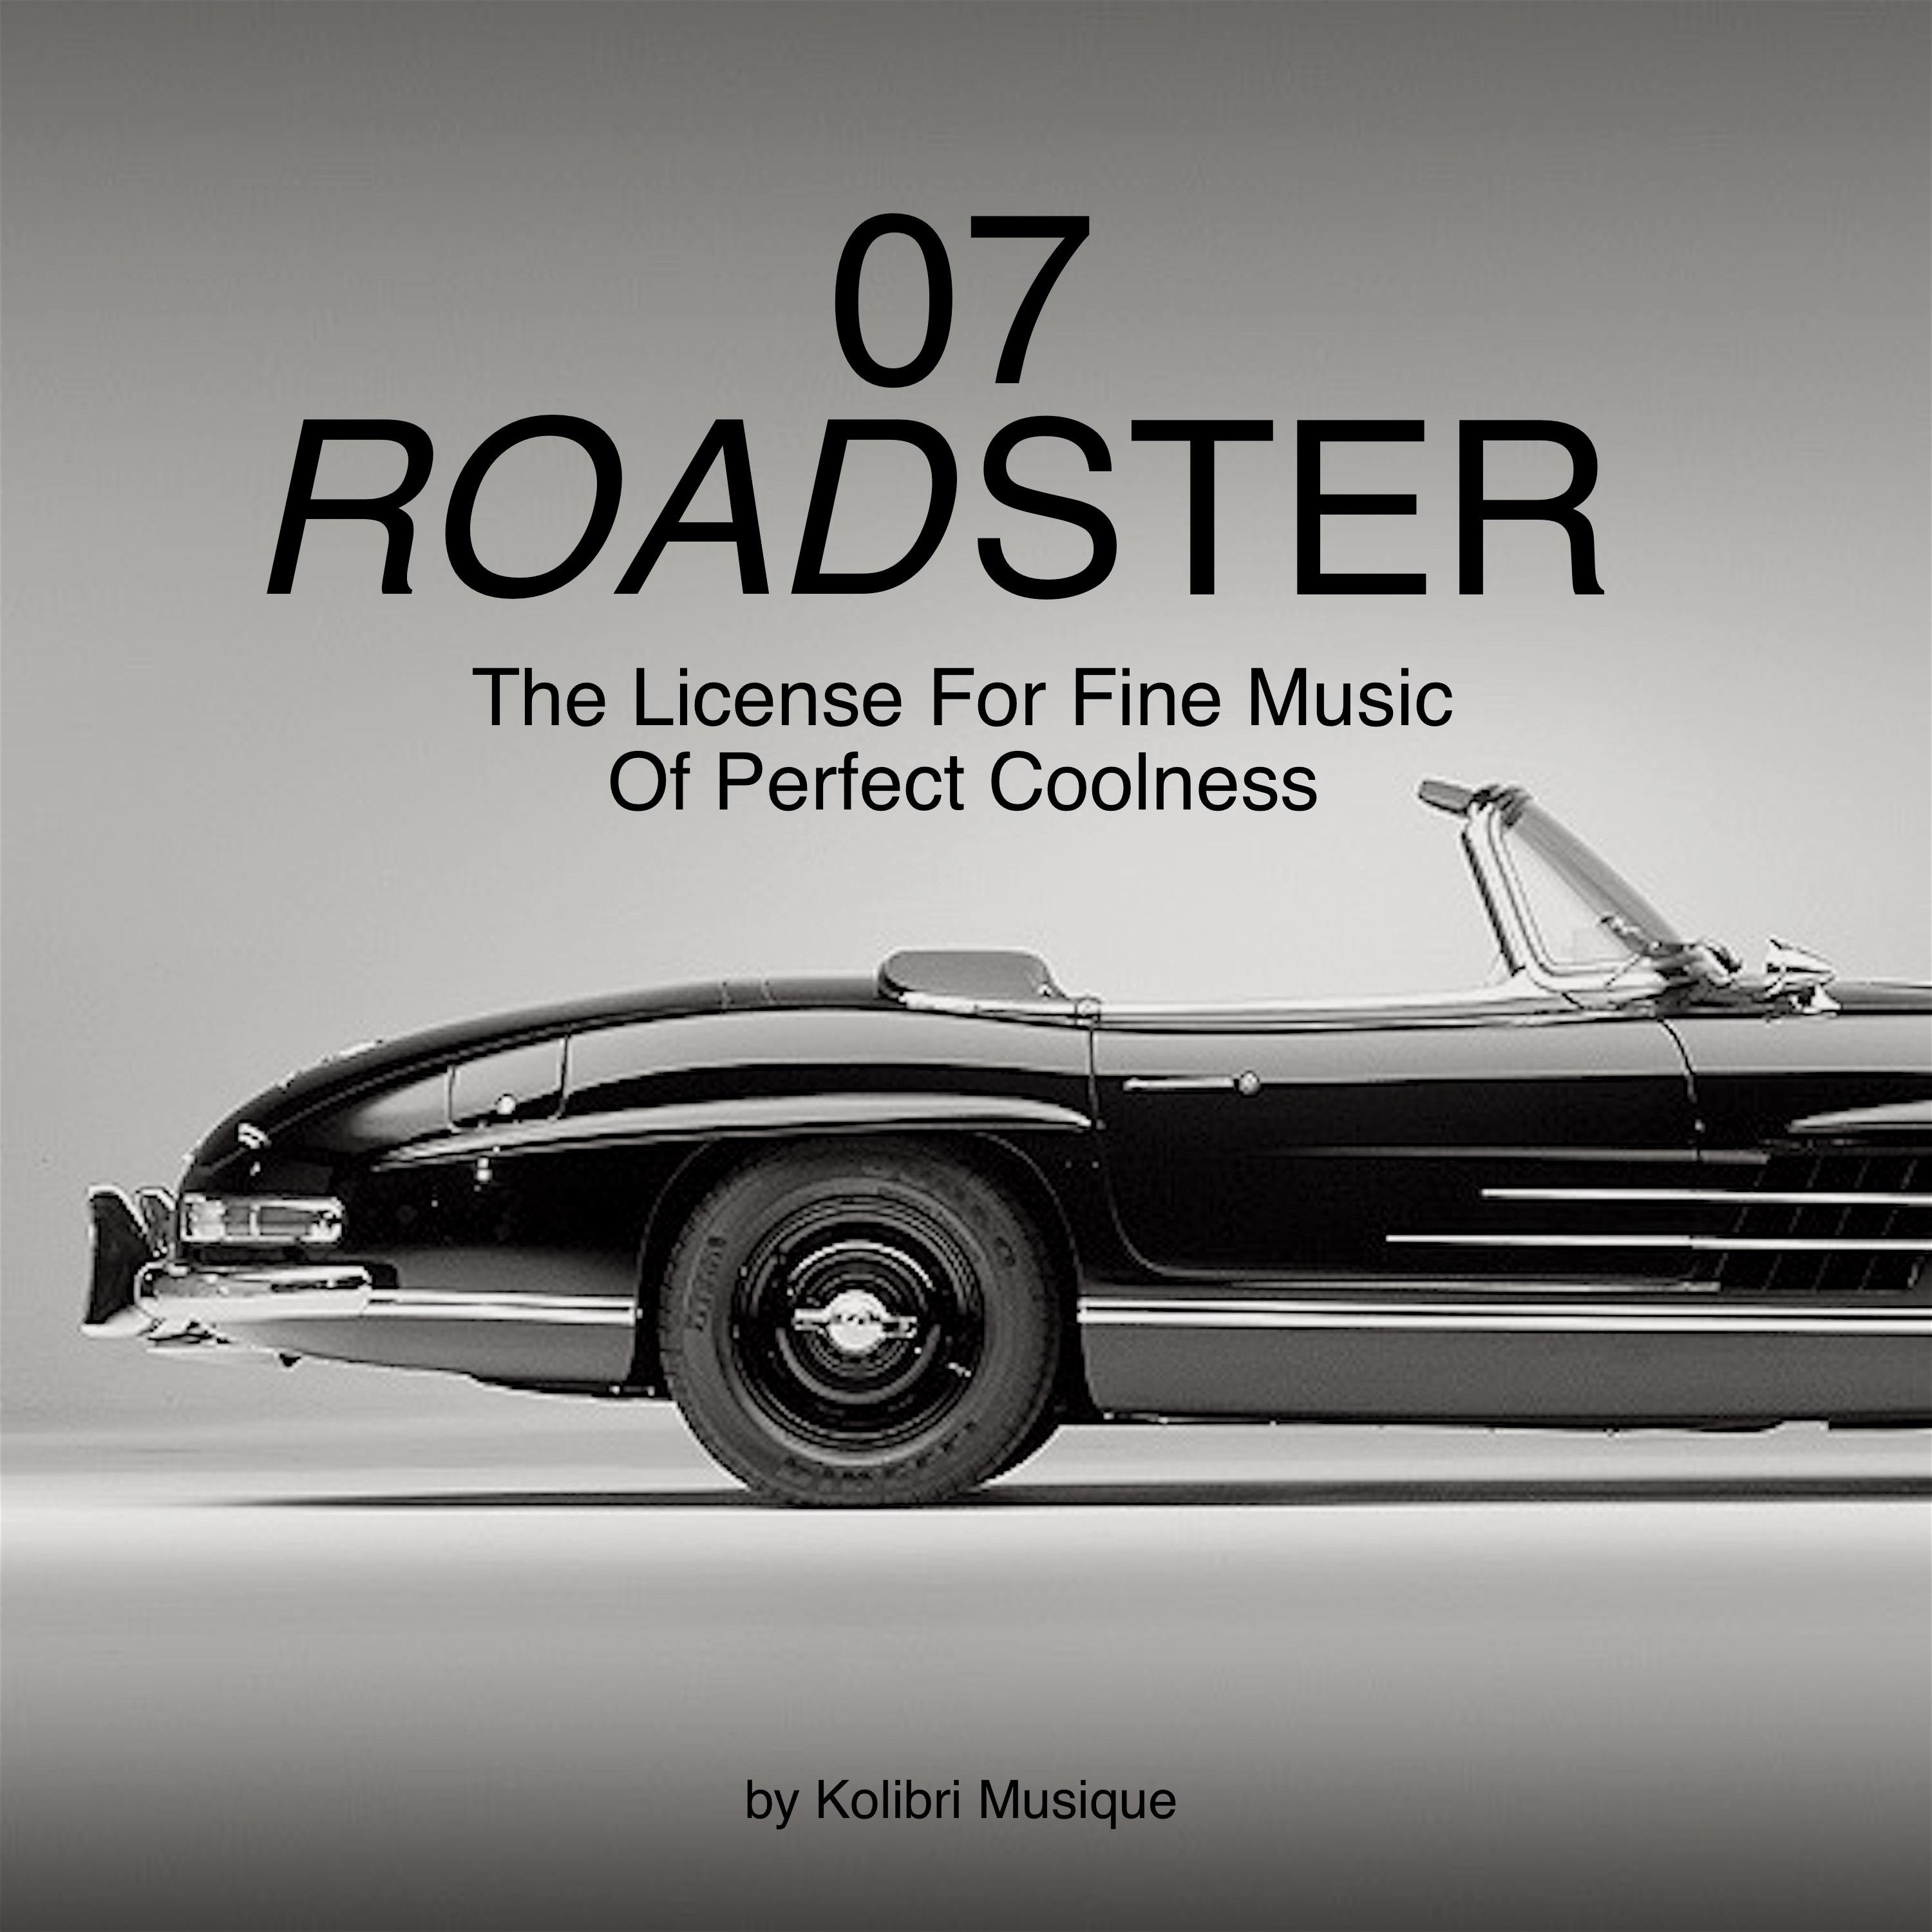 Roadster 07 - The License For Fine Music Of Perfect Coolness - Presented by Kolibri Musique